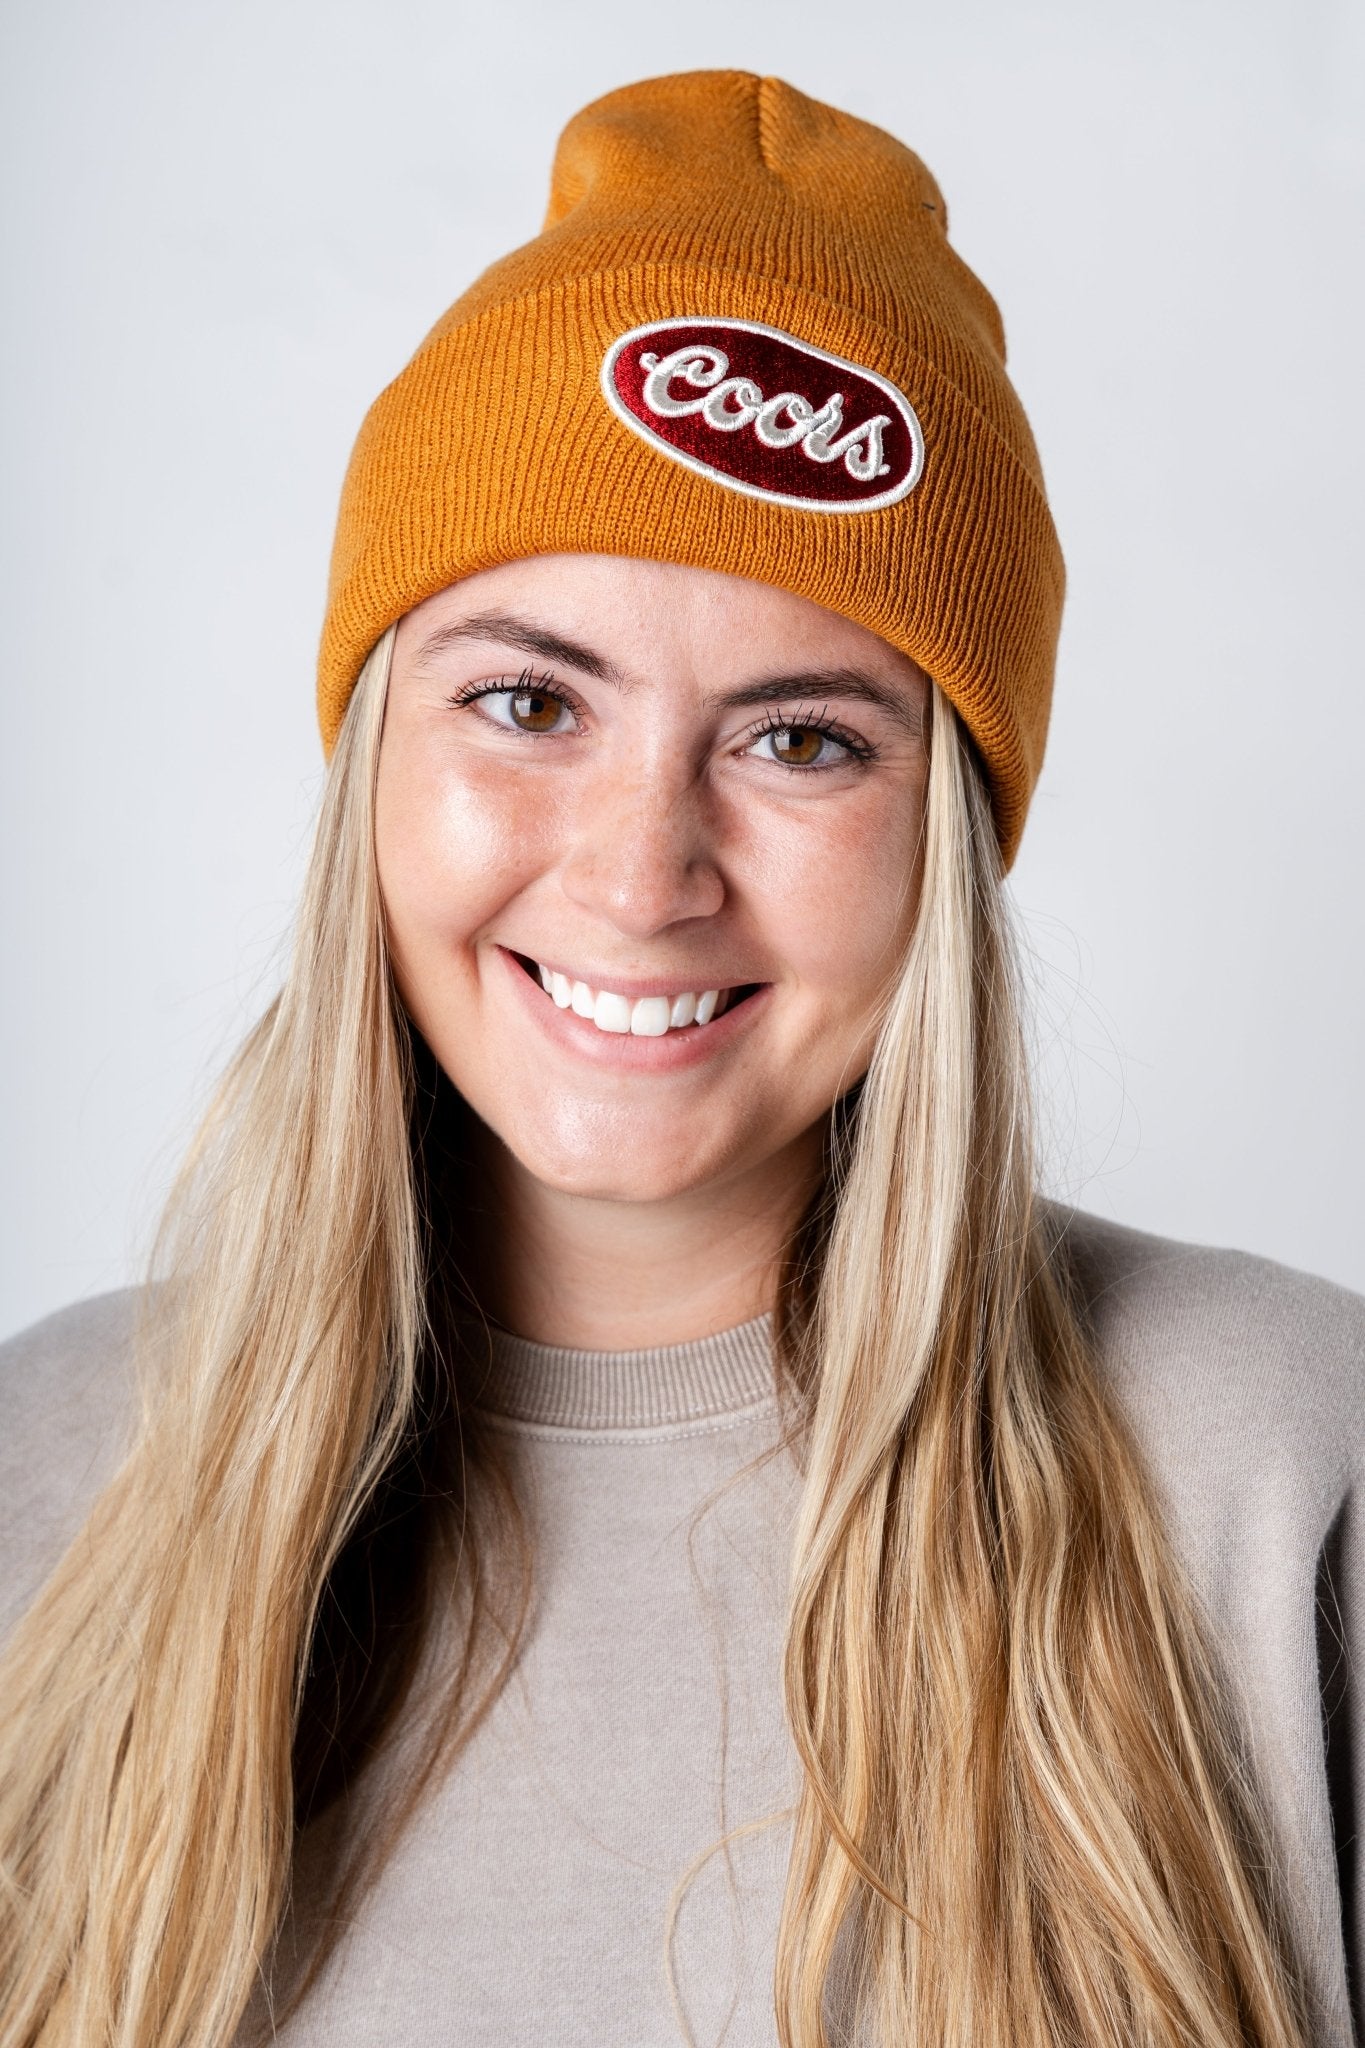 Coors cuffed knit beanie hazel - Trendy Gifts at Lush Fashion Lounge Boutique in Oklahoma City